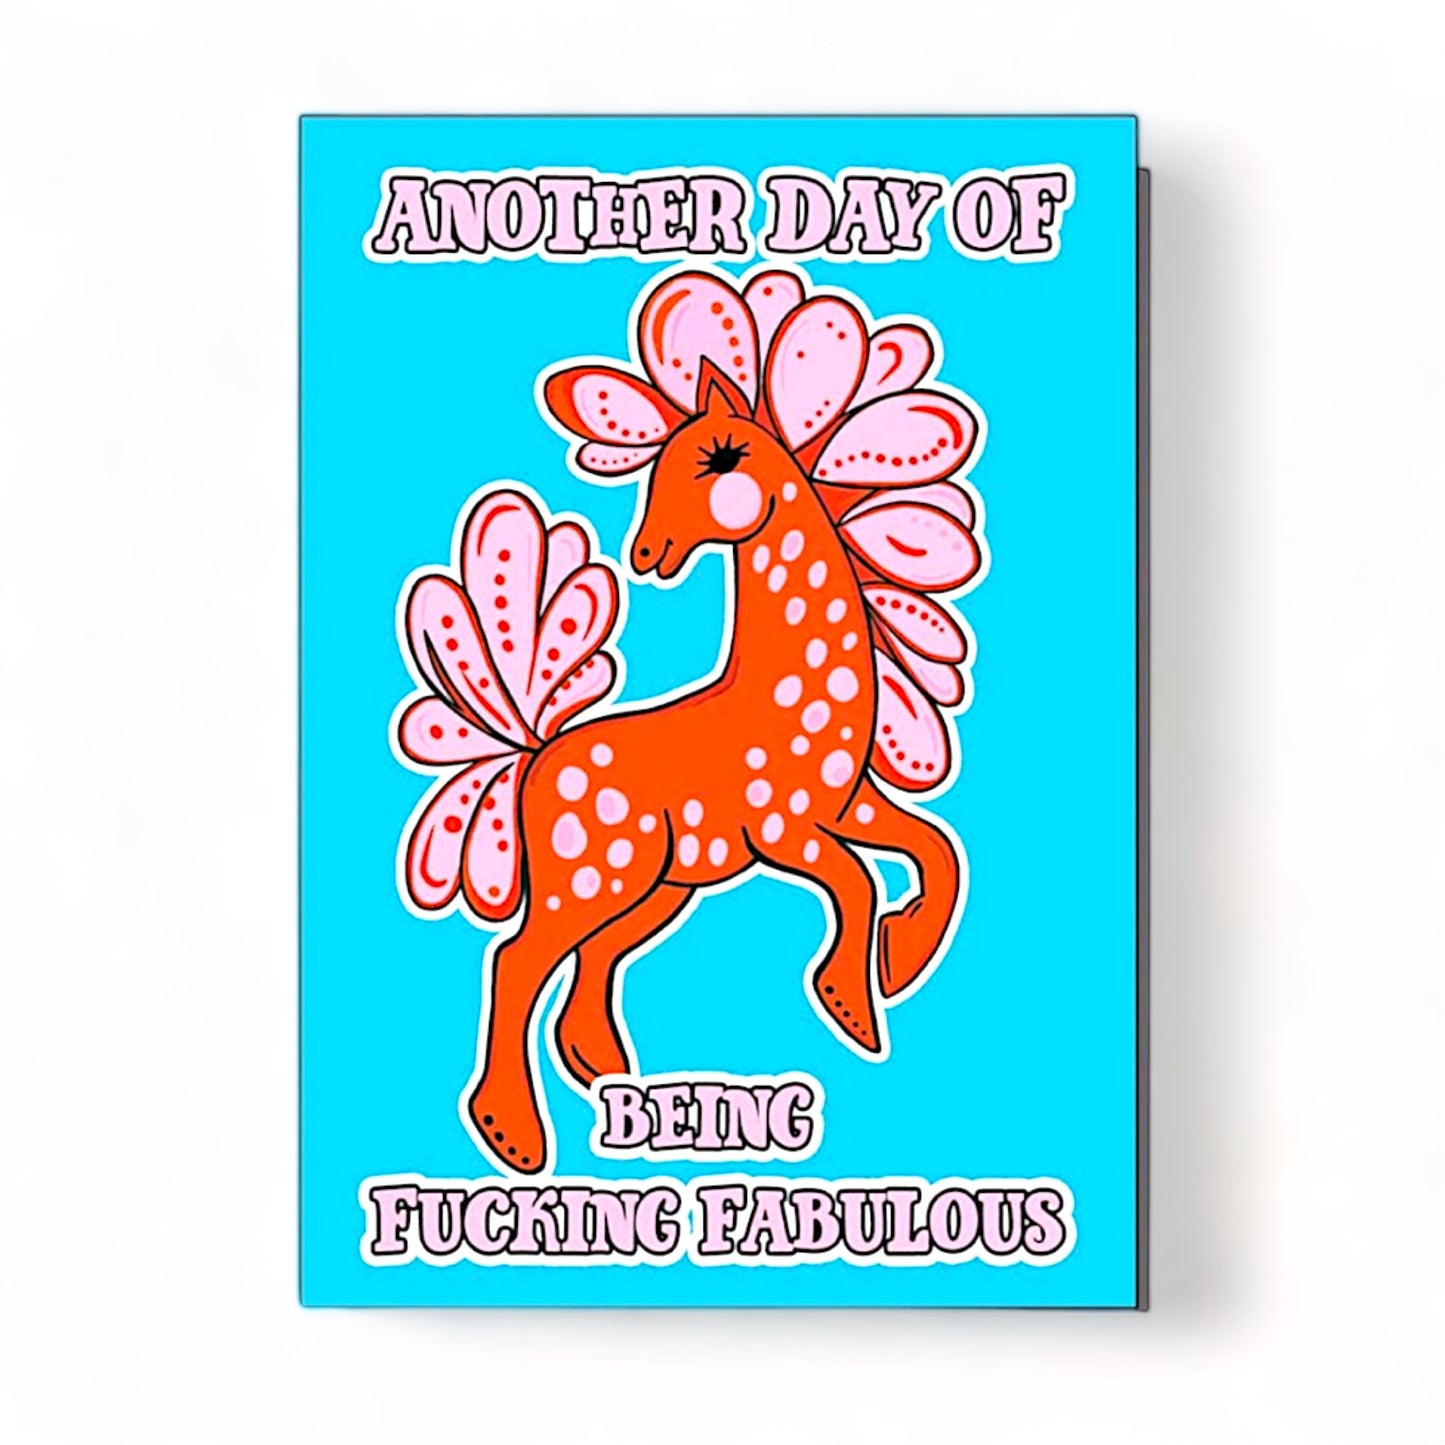 Another Day of Fabulous - Greeting Card